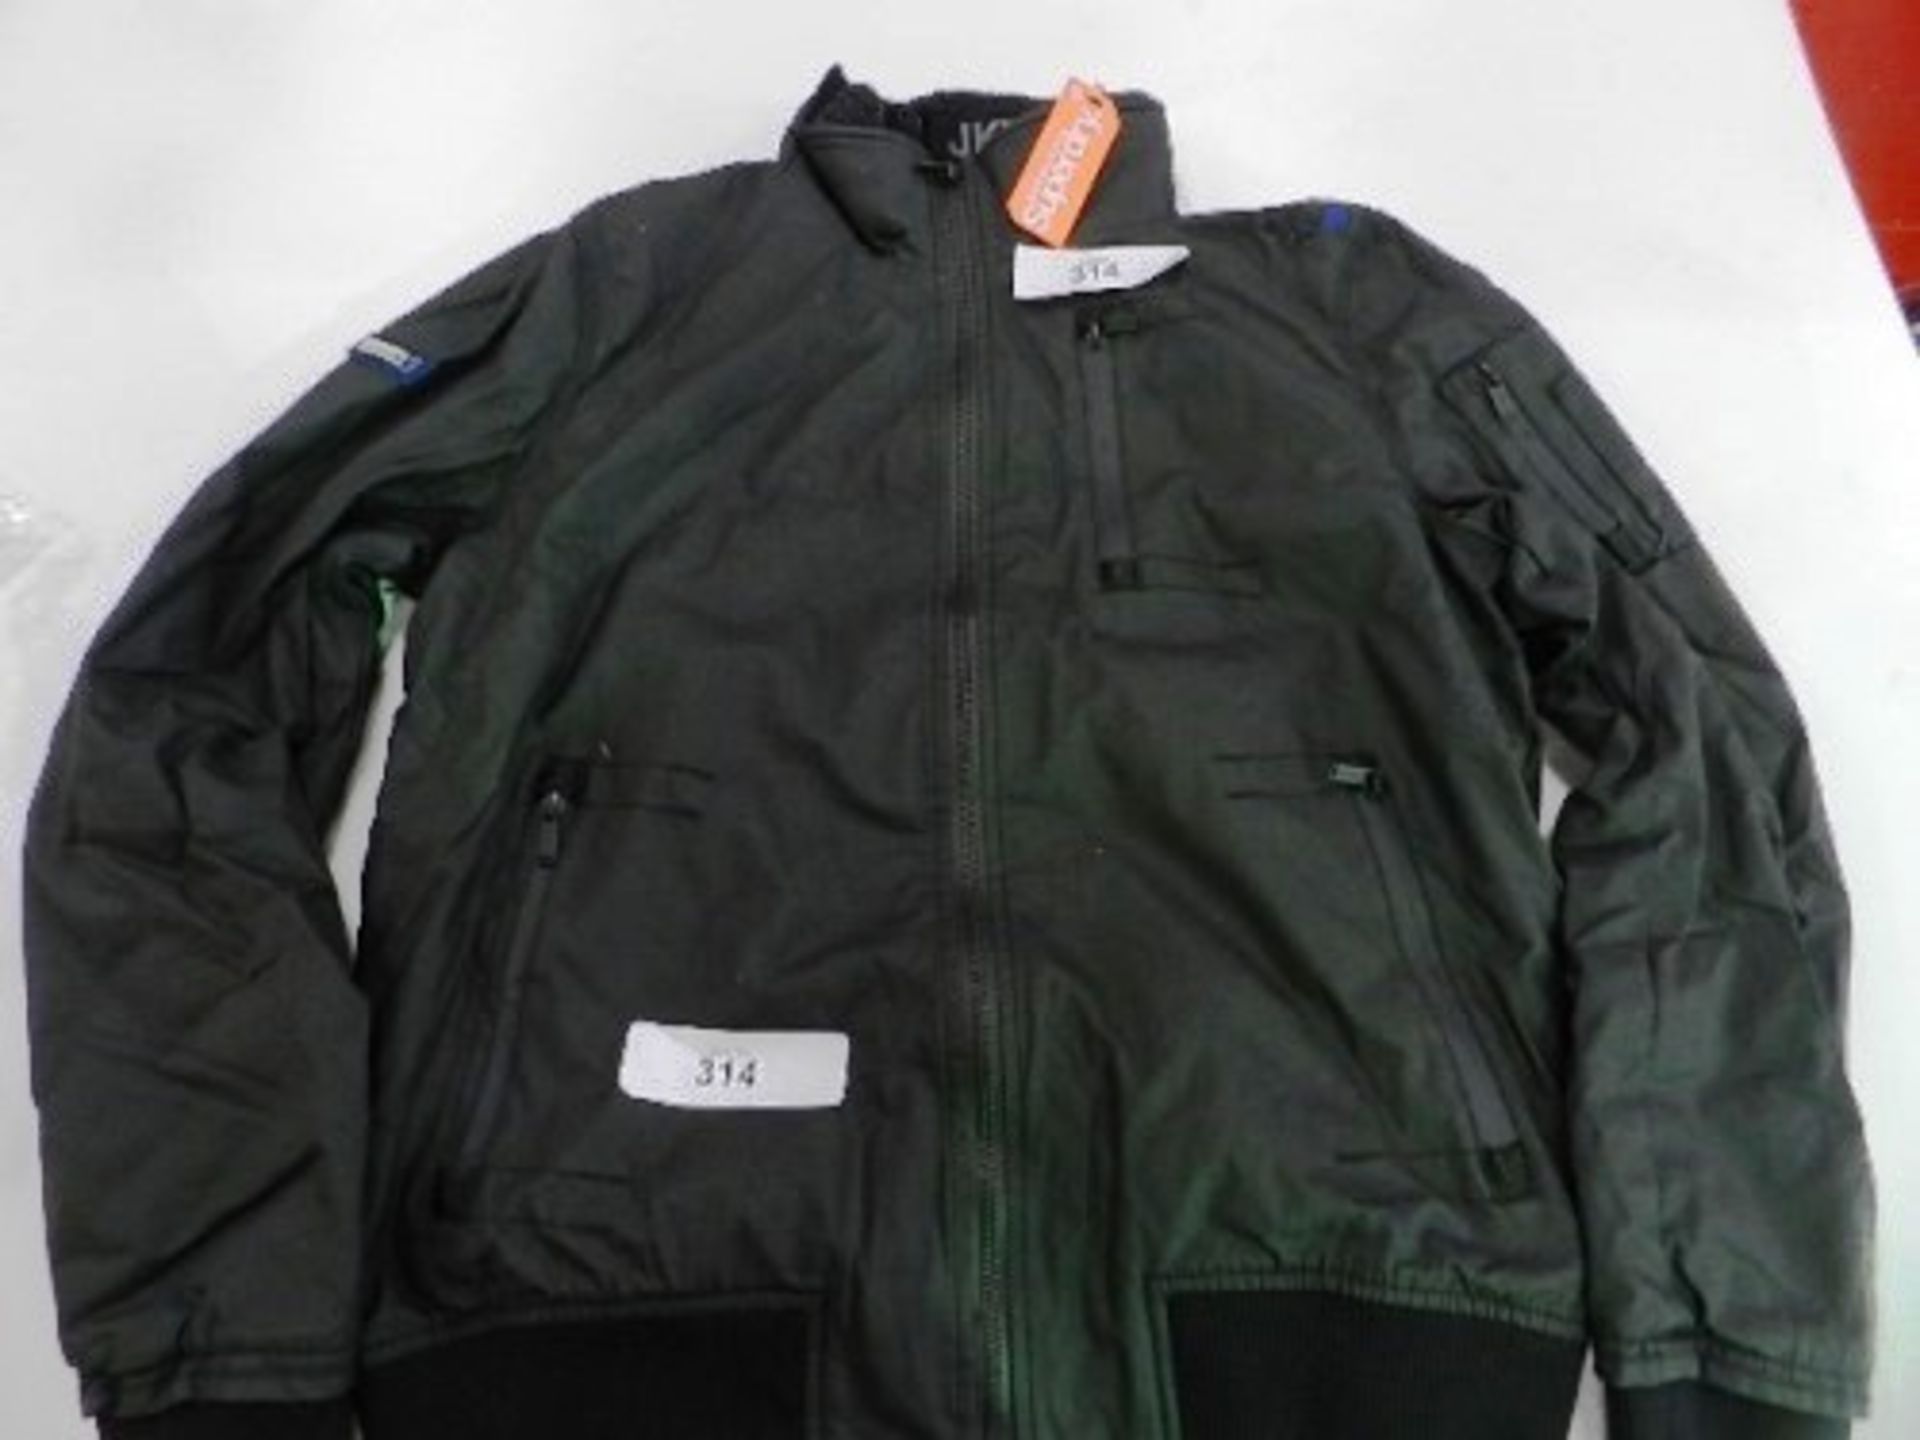 1 x Superdry black new moody ripstop bomber jacket, size 2XL, RRP £114.99 - New with tags (17)